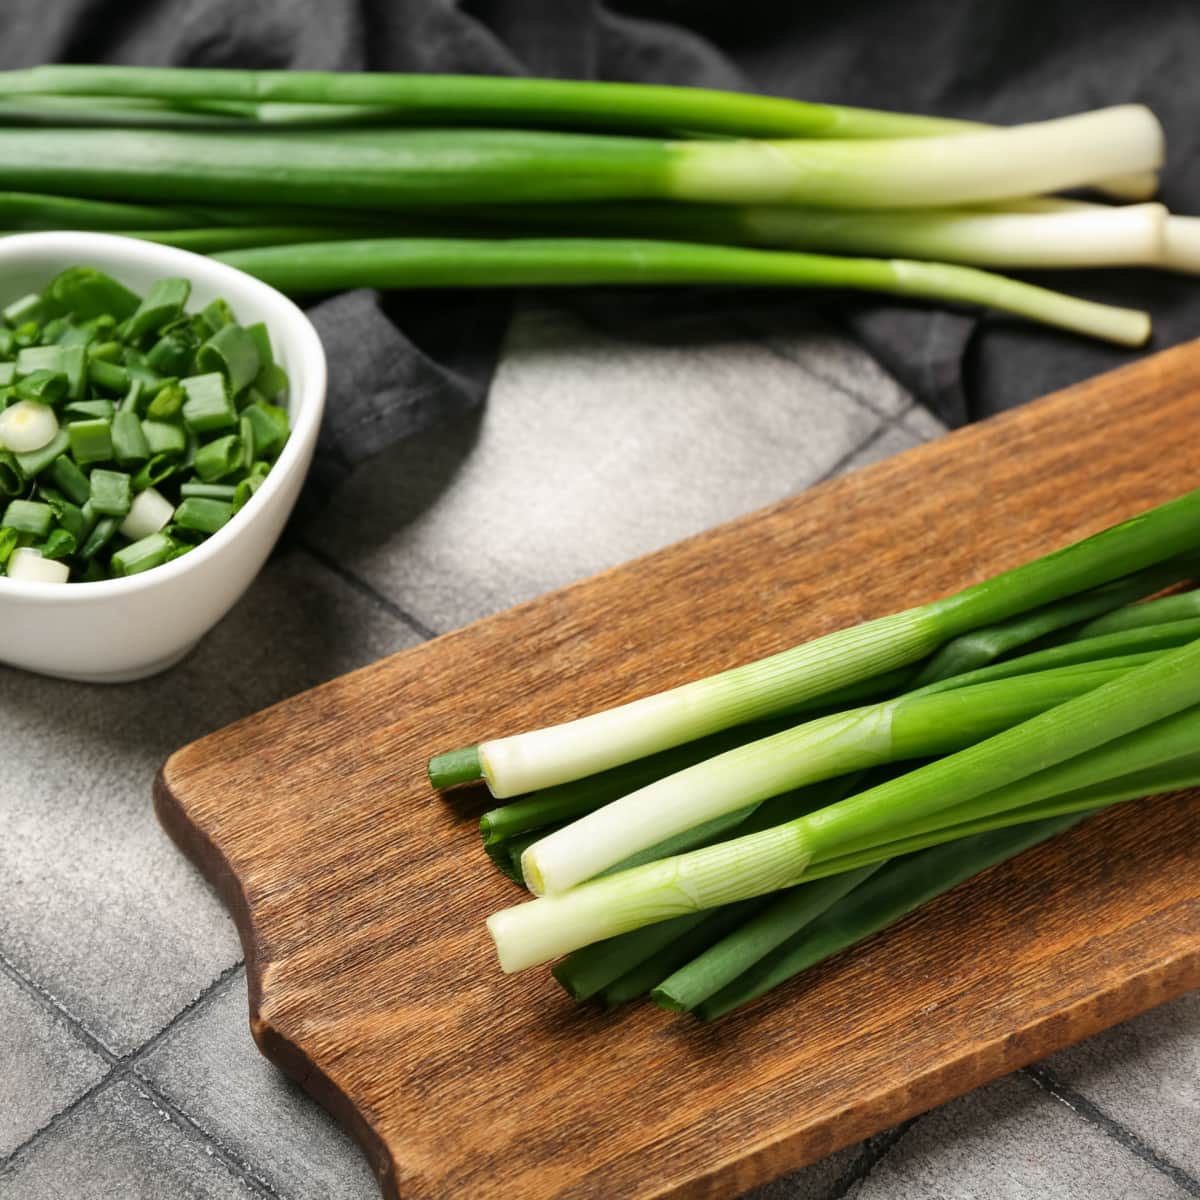 Green Onions on a Wooden Cutting Board and Slice Green Onions on a Bowl